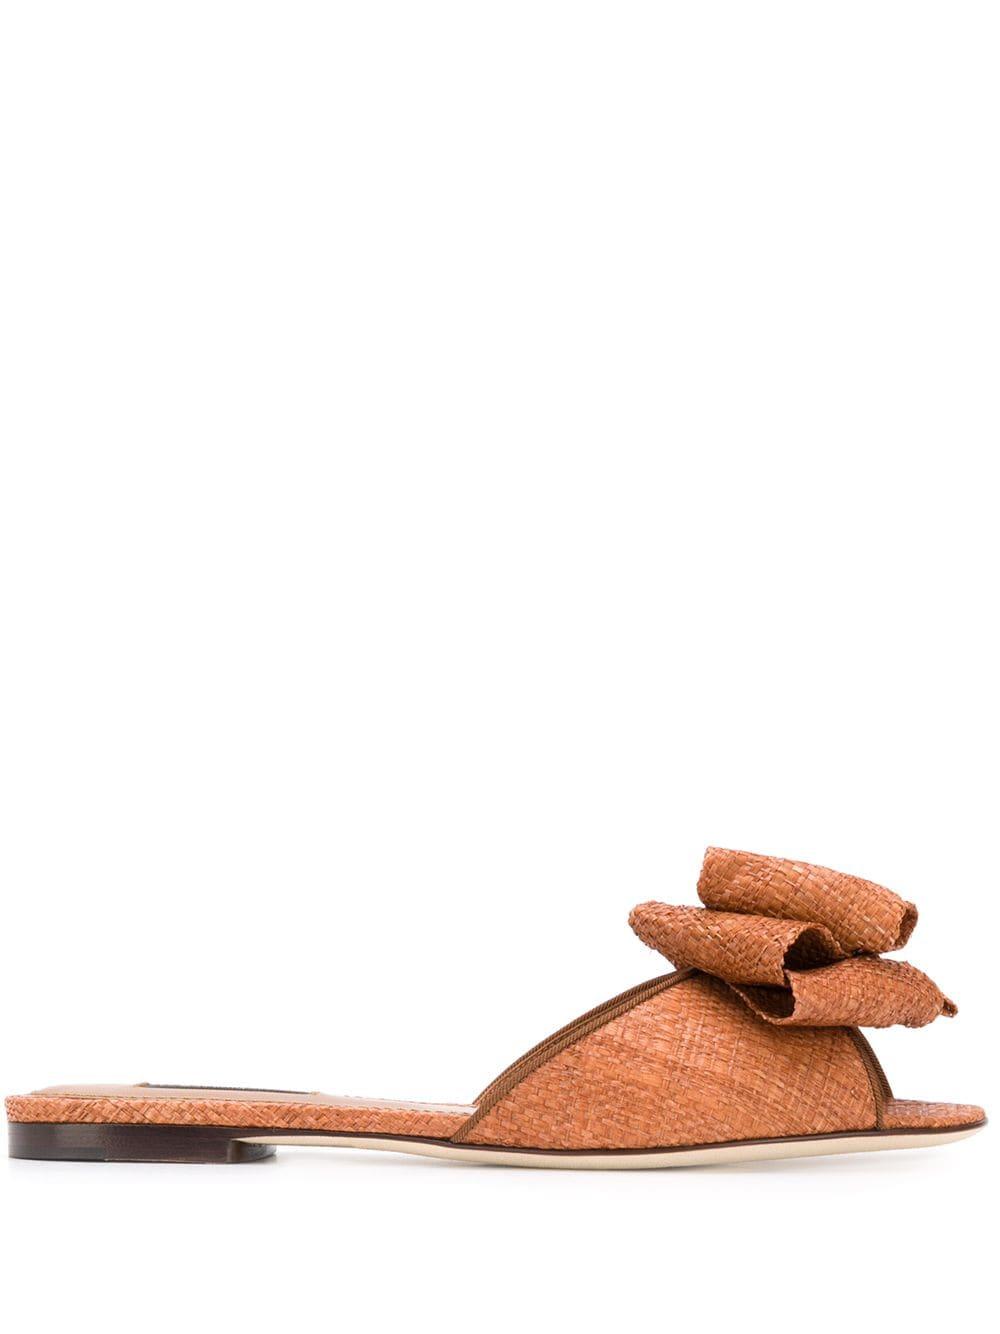 Dolce & Gabbana Leather Bow Detail Flat Sandals in Brown - Lyst